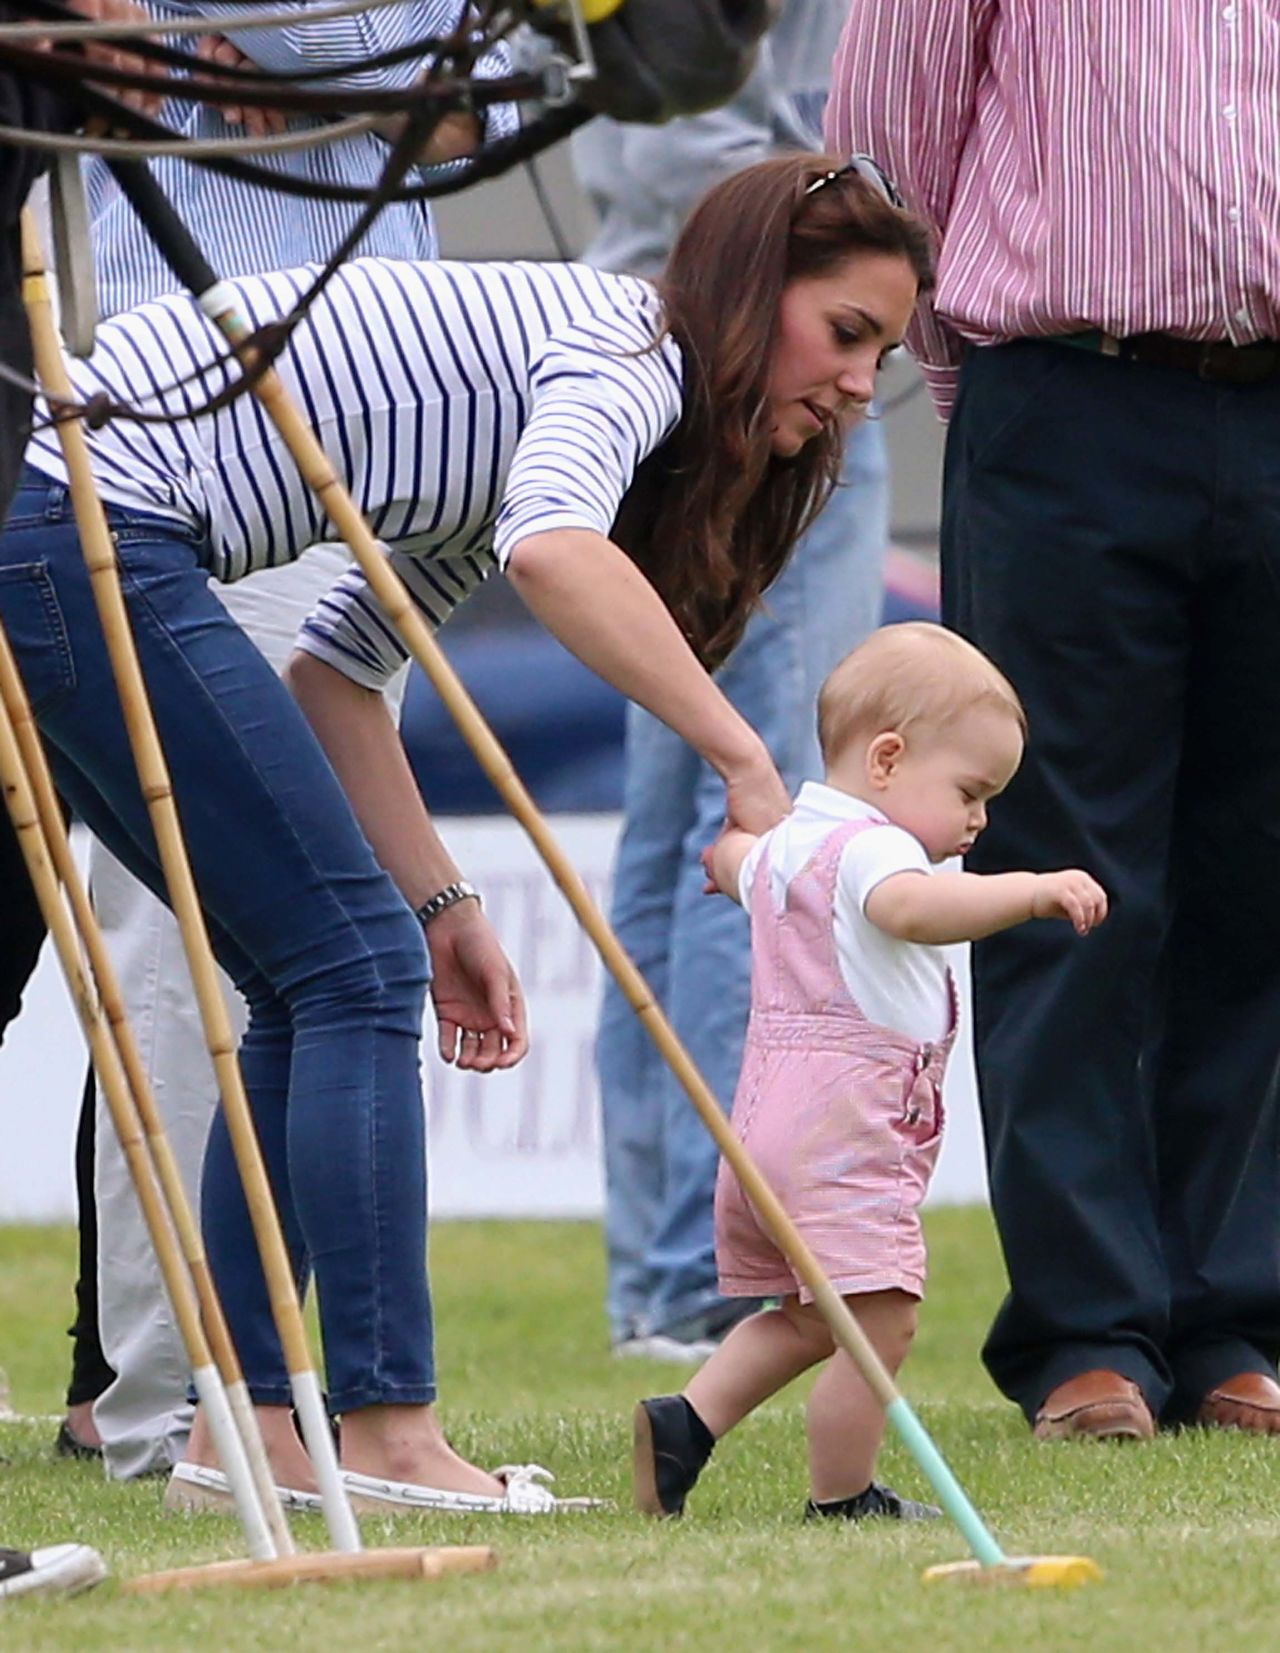 George takes his first steps in public as his mother holds his hand in June 2014.